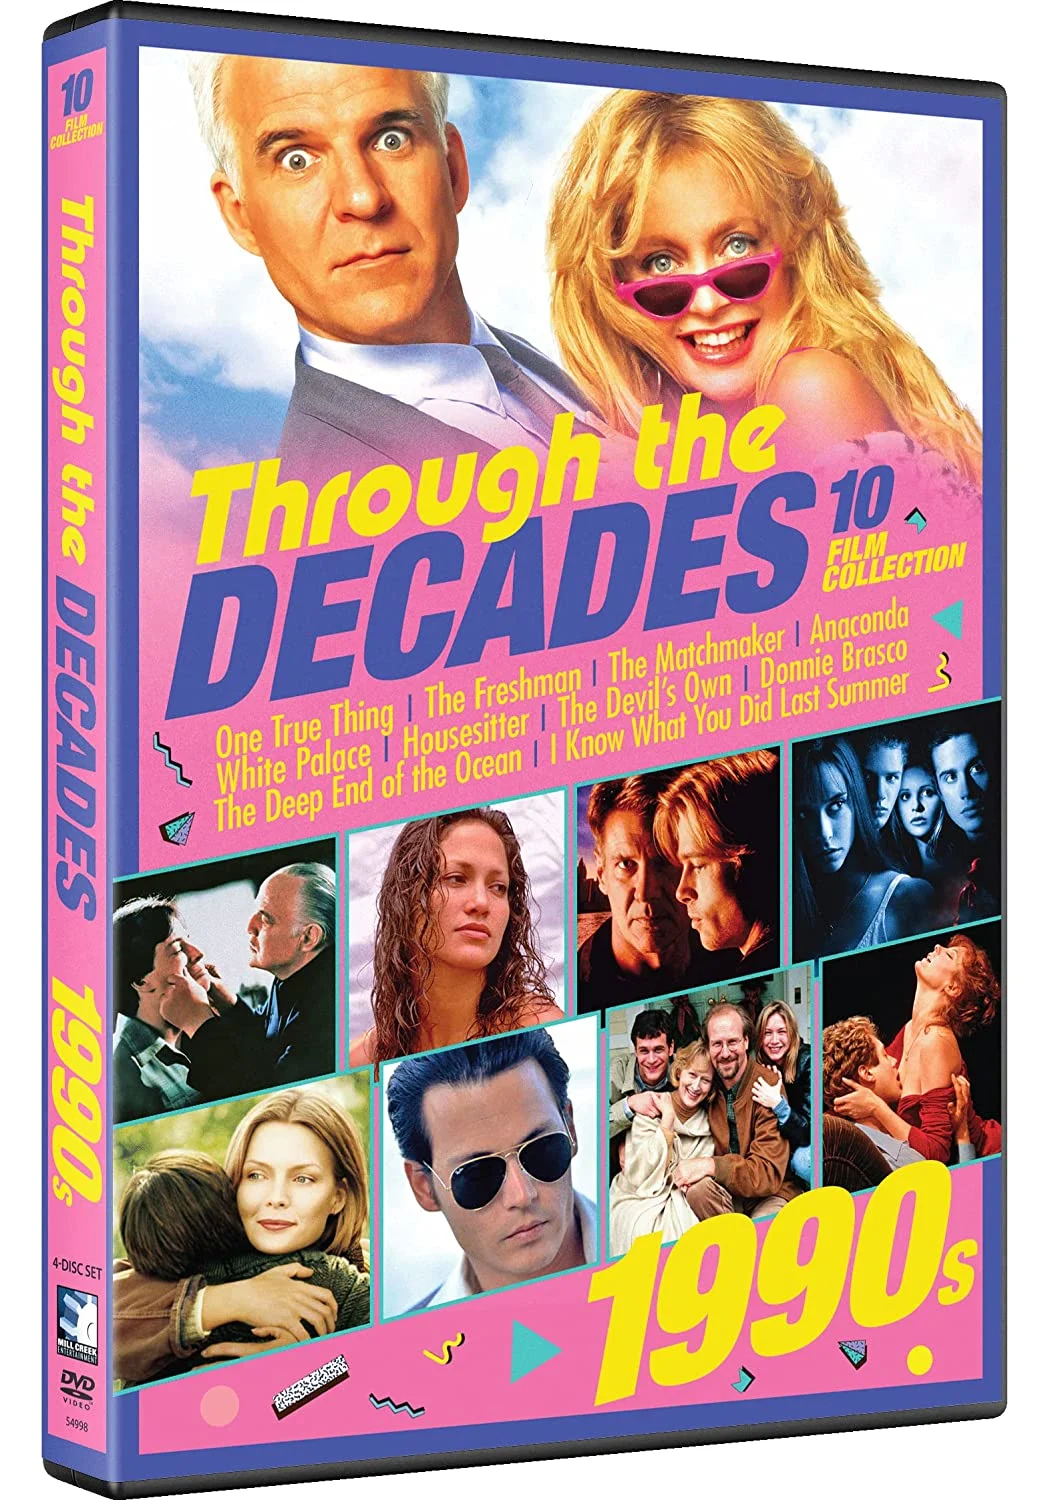 Through the Decades: 1990’s Collection (DVD) on MovieShack